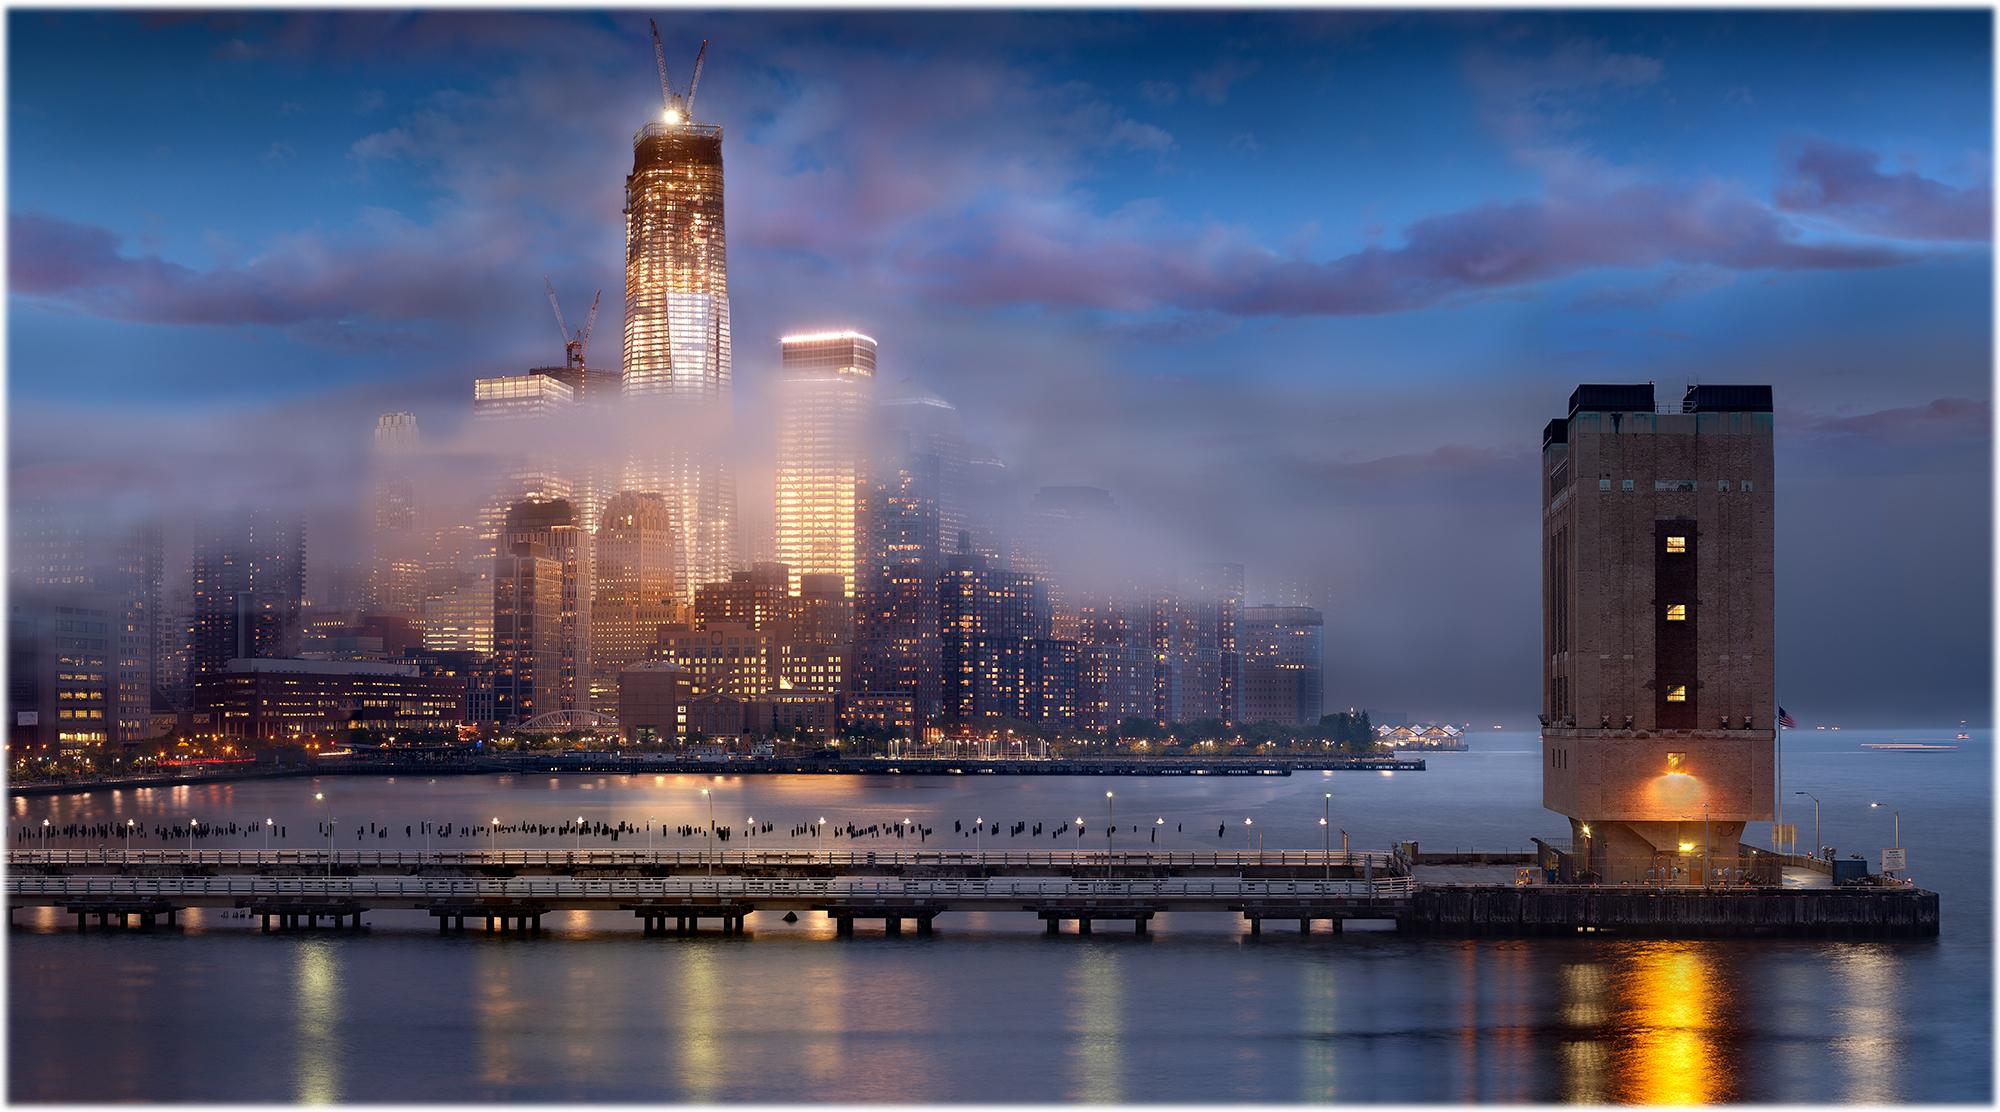 James Bleecker Color Photograph - One World Trade Center 11 (Panoramic Landscape Color Print of Freedom Tower)